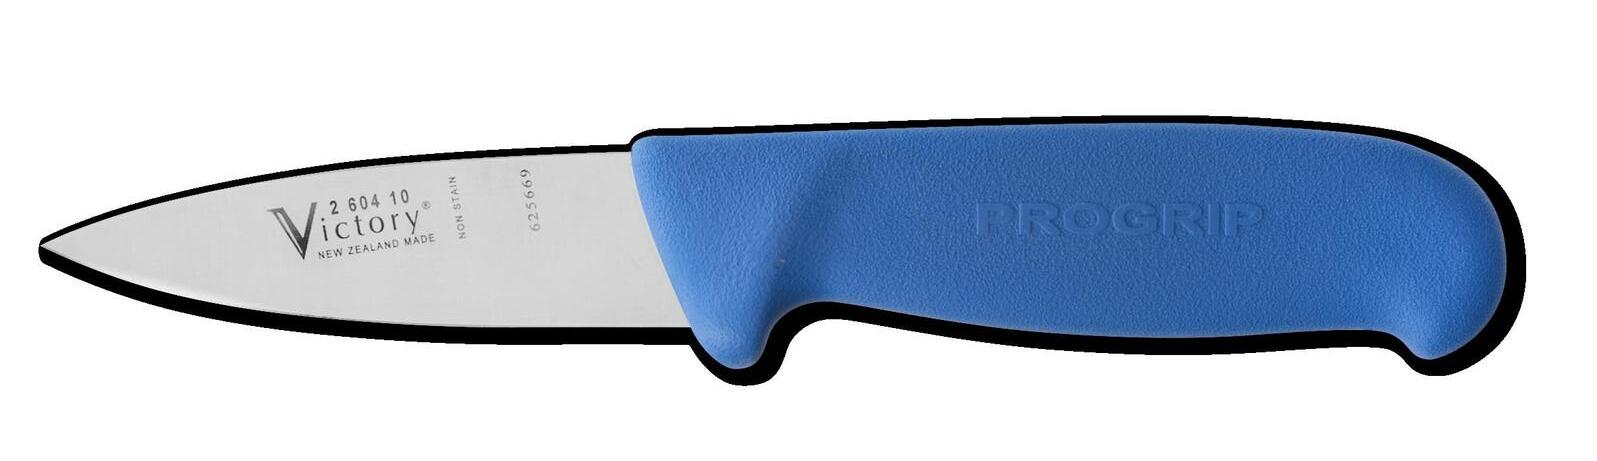 Victory Knives 260410200 - 2.5mm x 10cm Stainless Steel Tuna Knife (Blue Progrip Handle)